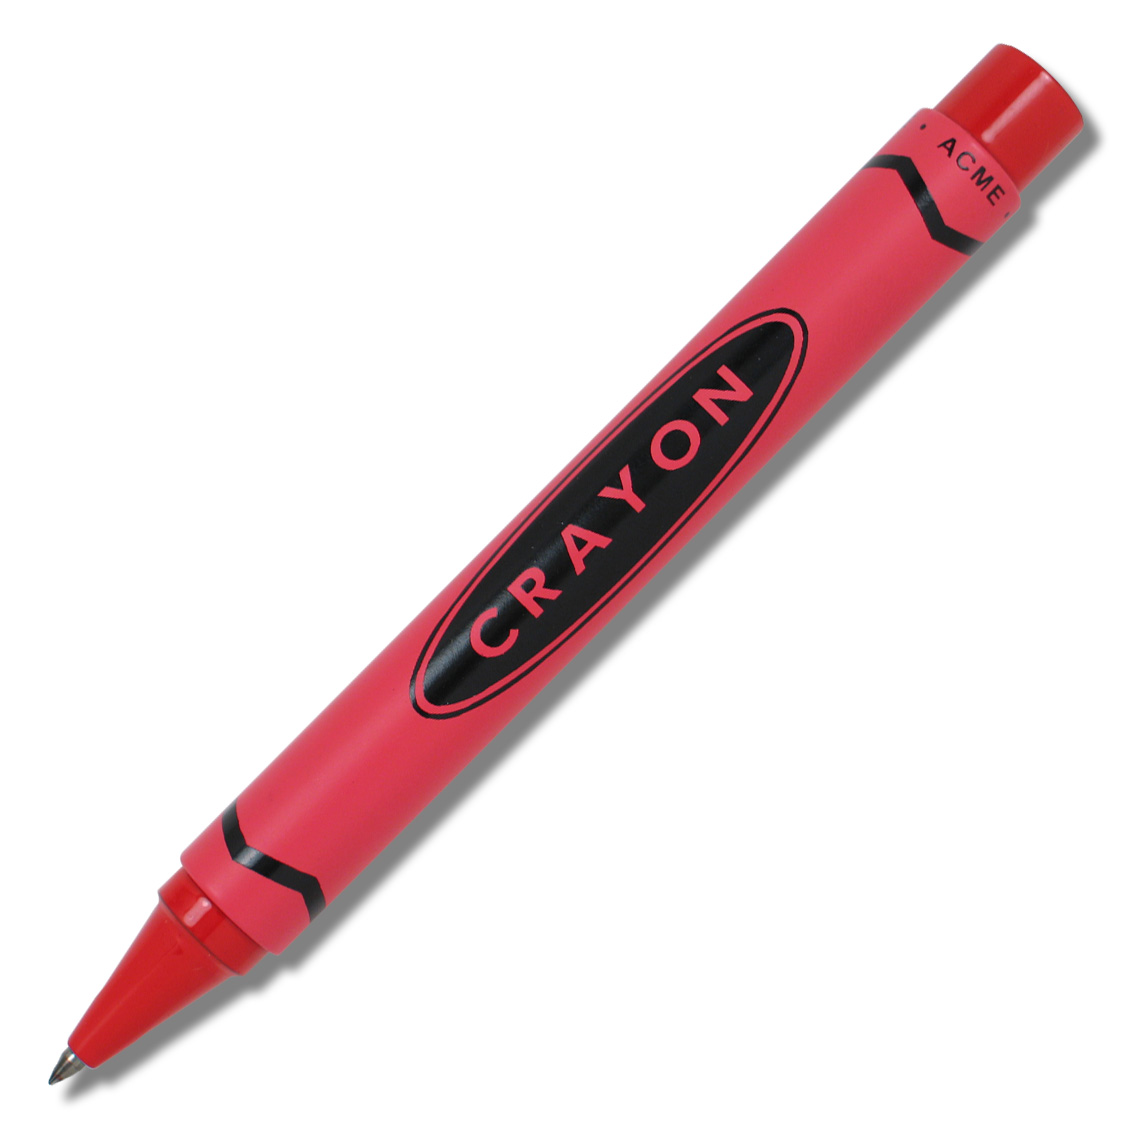 https://acmestudio.com/images/products/Olabuenaga-CRAYON-RED-Retractable-Roller-Ball-products-writing-tools-materiali-01.jpg